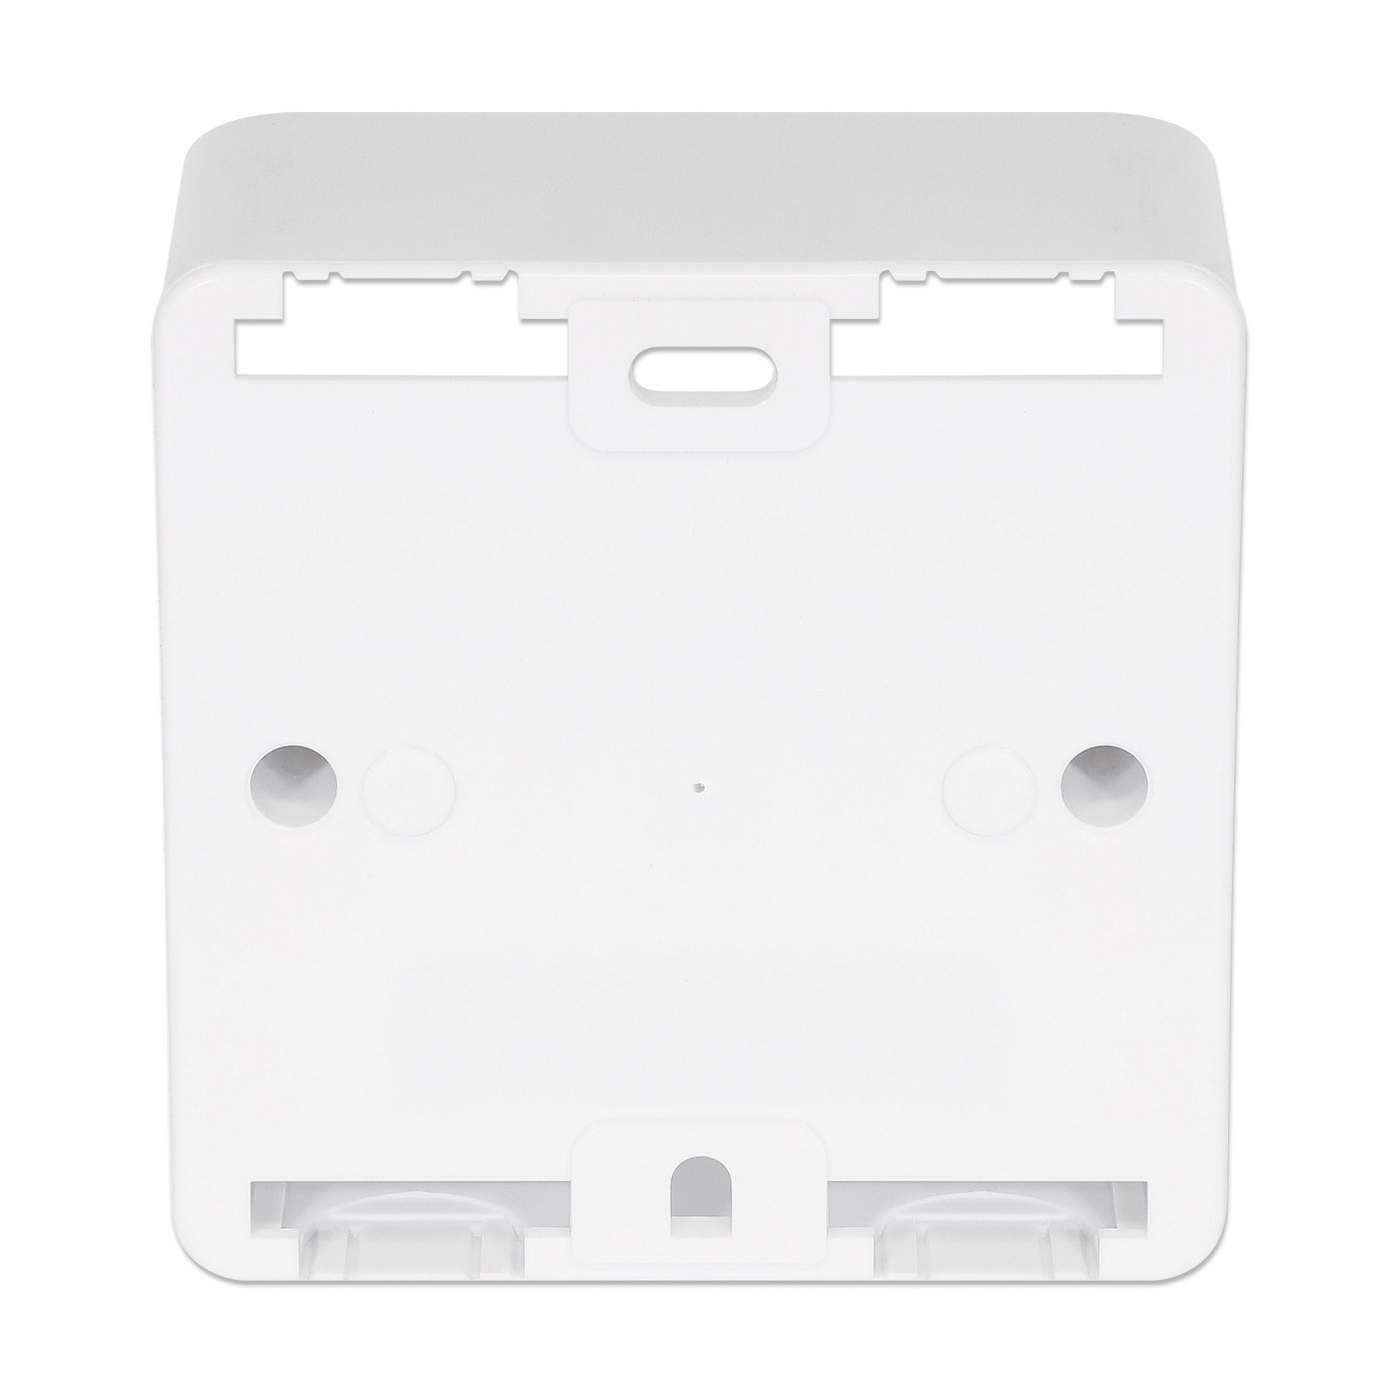 Surface Mount Pattress Box for Wall Plates Image 4